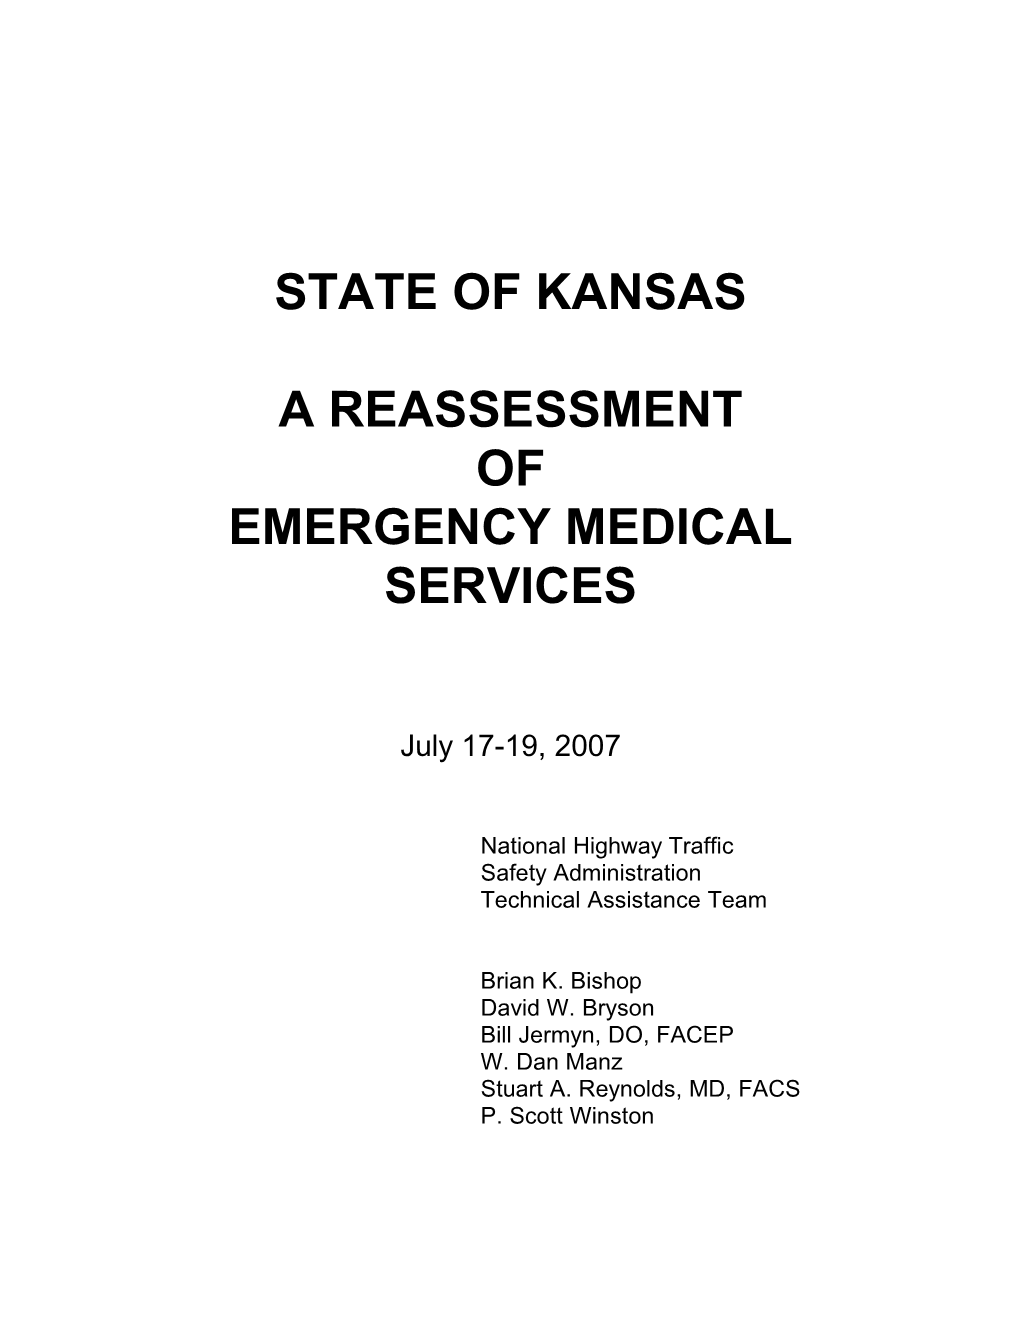 State of Kansas a Reassessment of Emergency Medical Services